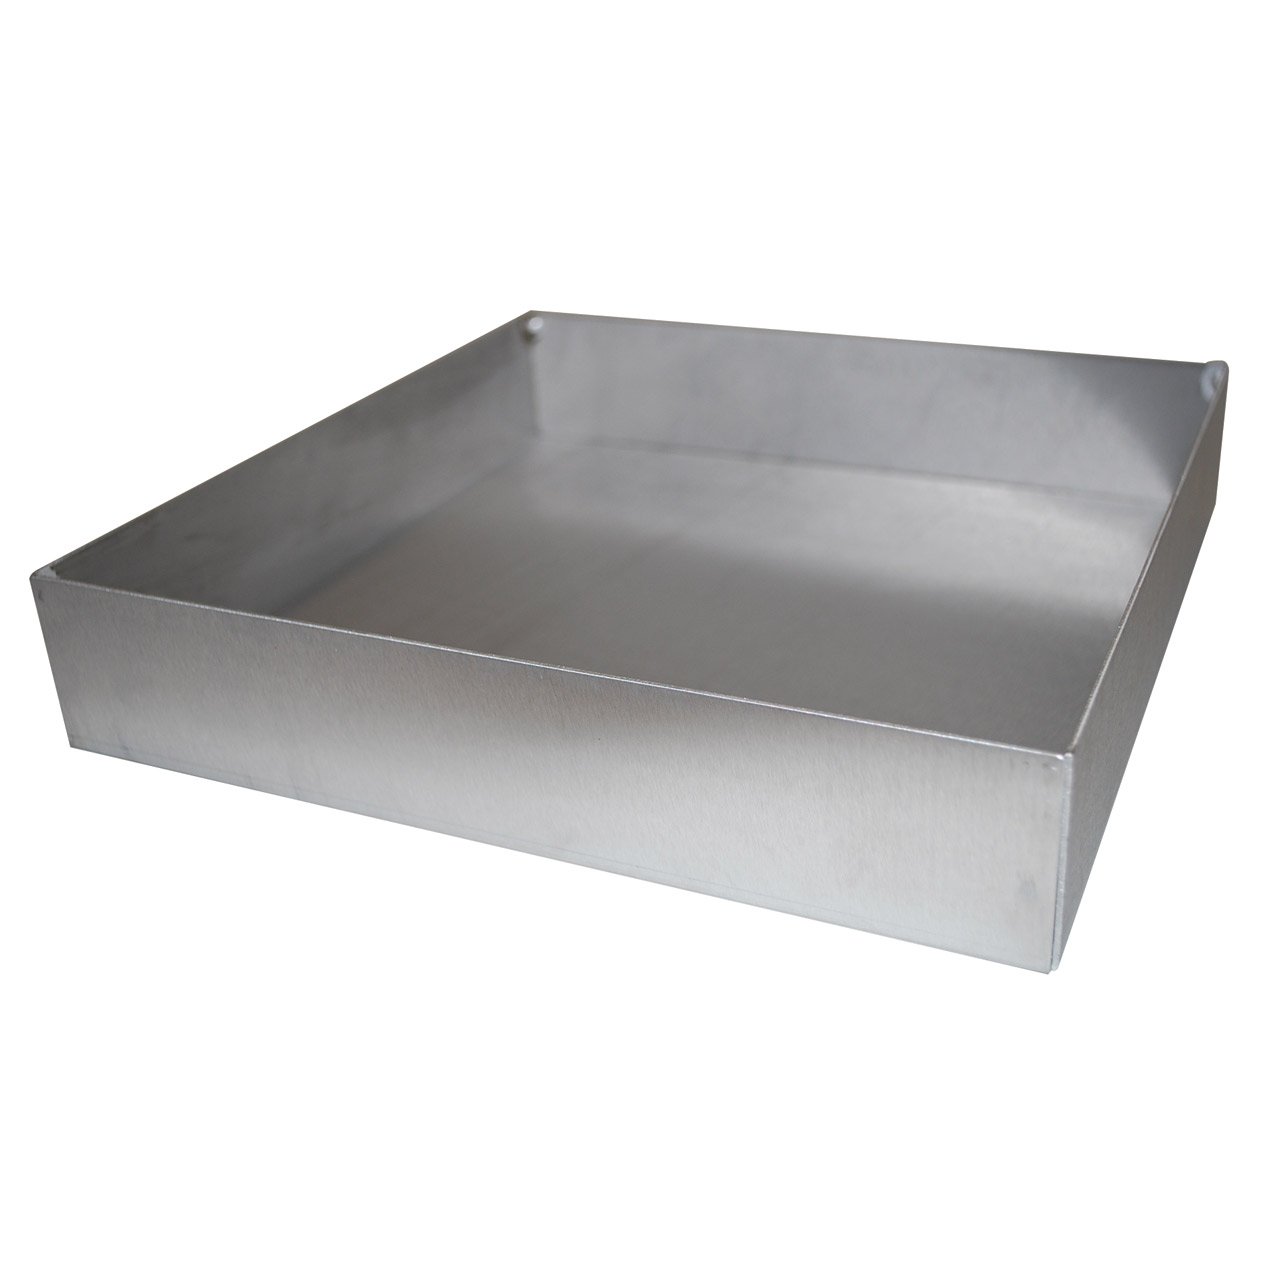 Autoclavable Tray for Drosophila Vials - Wide Stainless Steel (1)